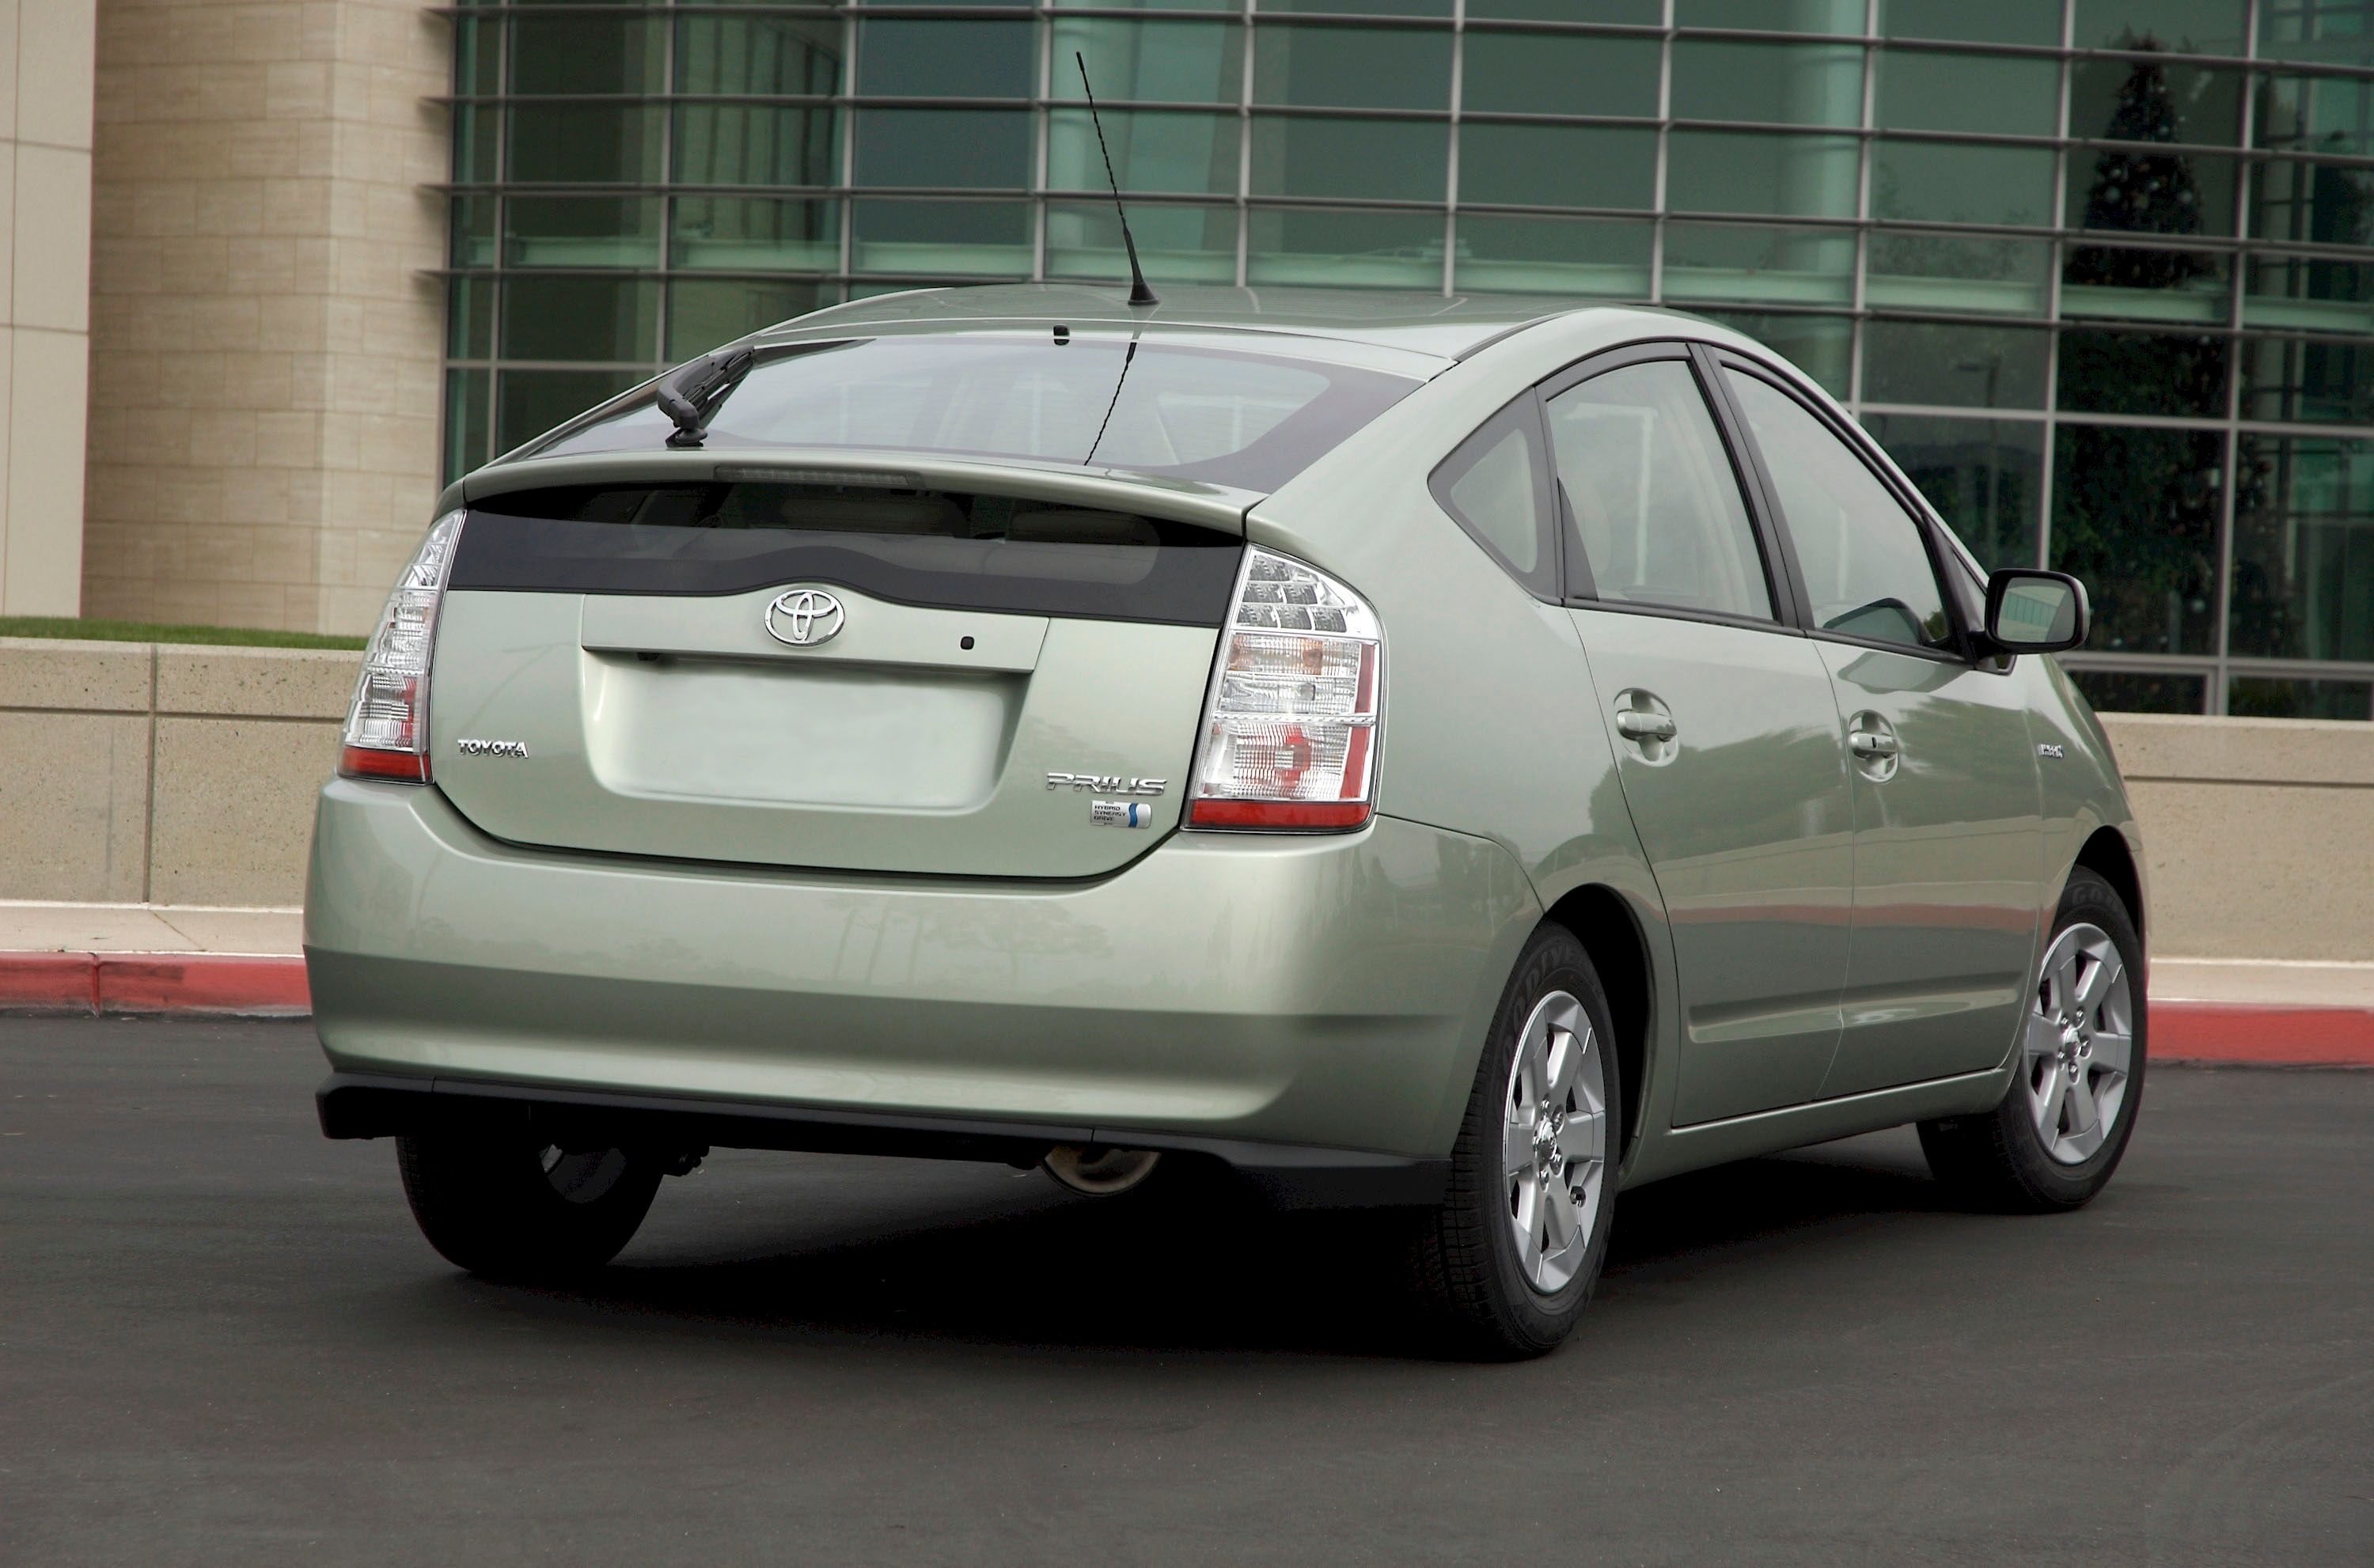 Toyota Prius 2nd Gen Rear Angle View